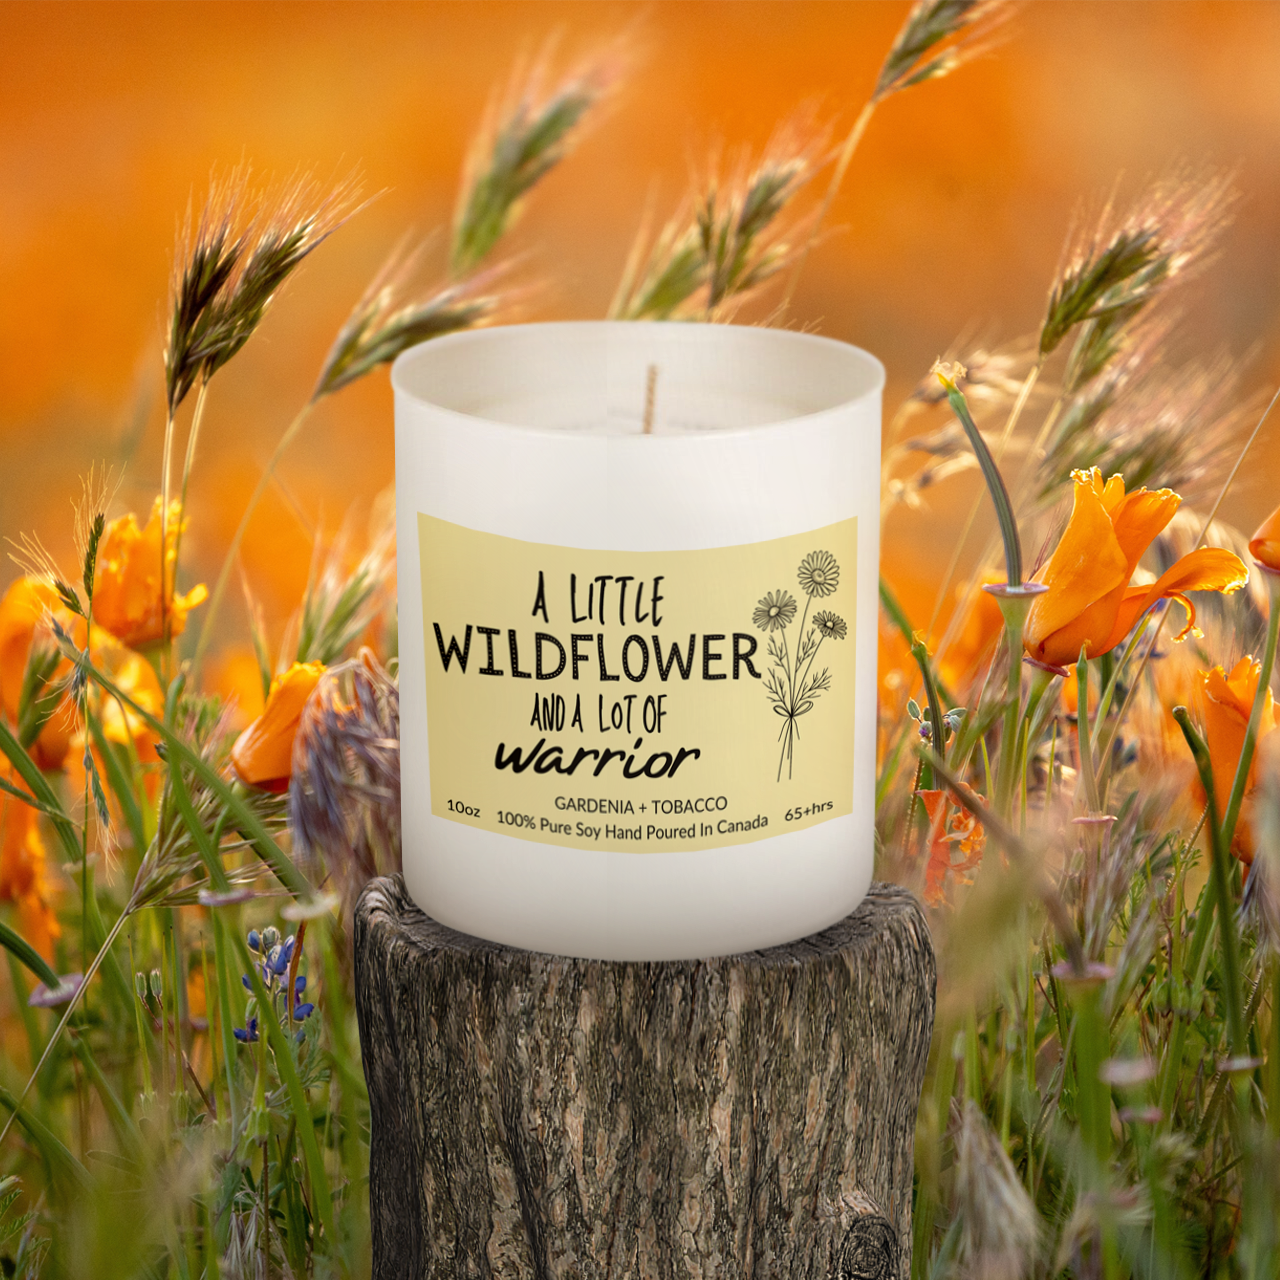 Wildflower Collection - A Little Wildflower And A Lot Of Warrior